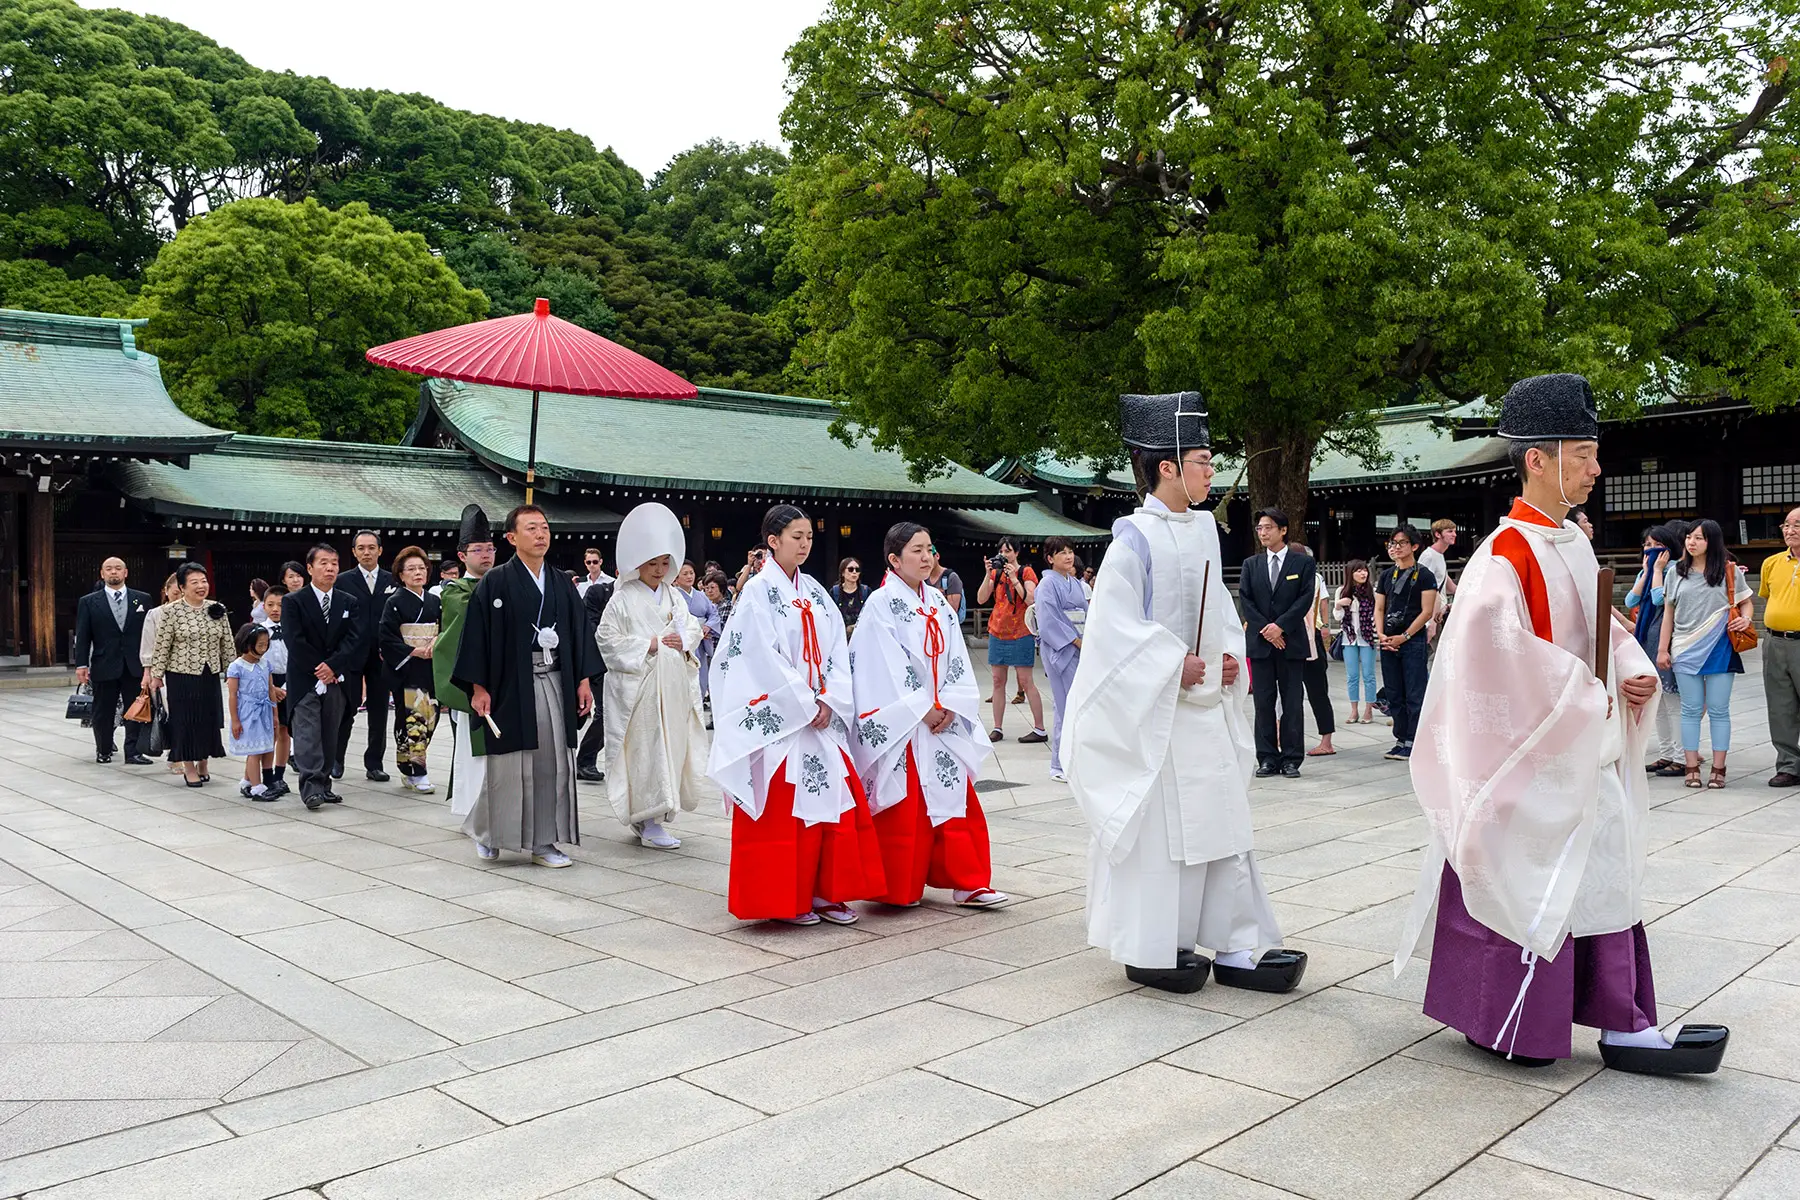 A procession through a temple of people wearing traditional Japanese wedding outfits